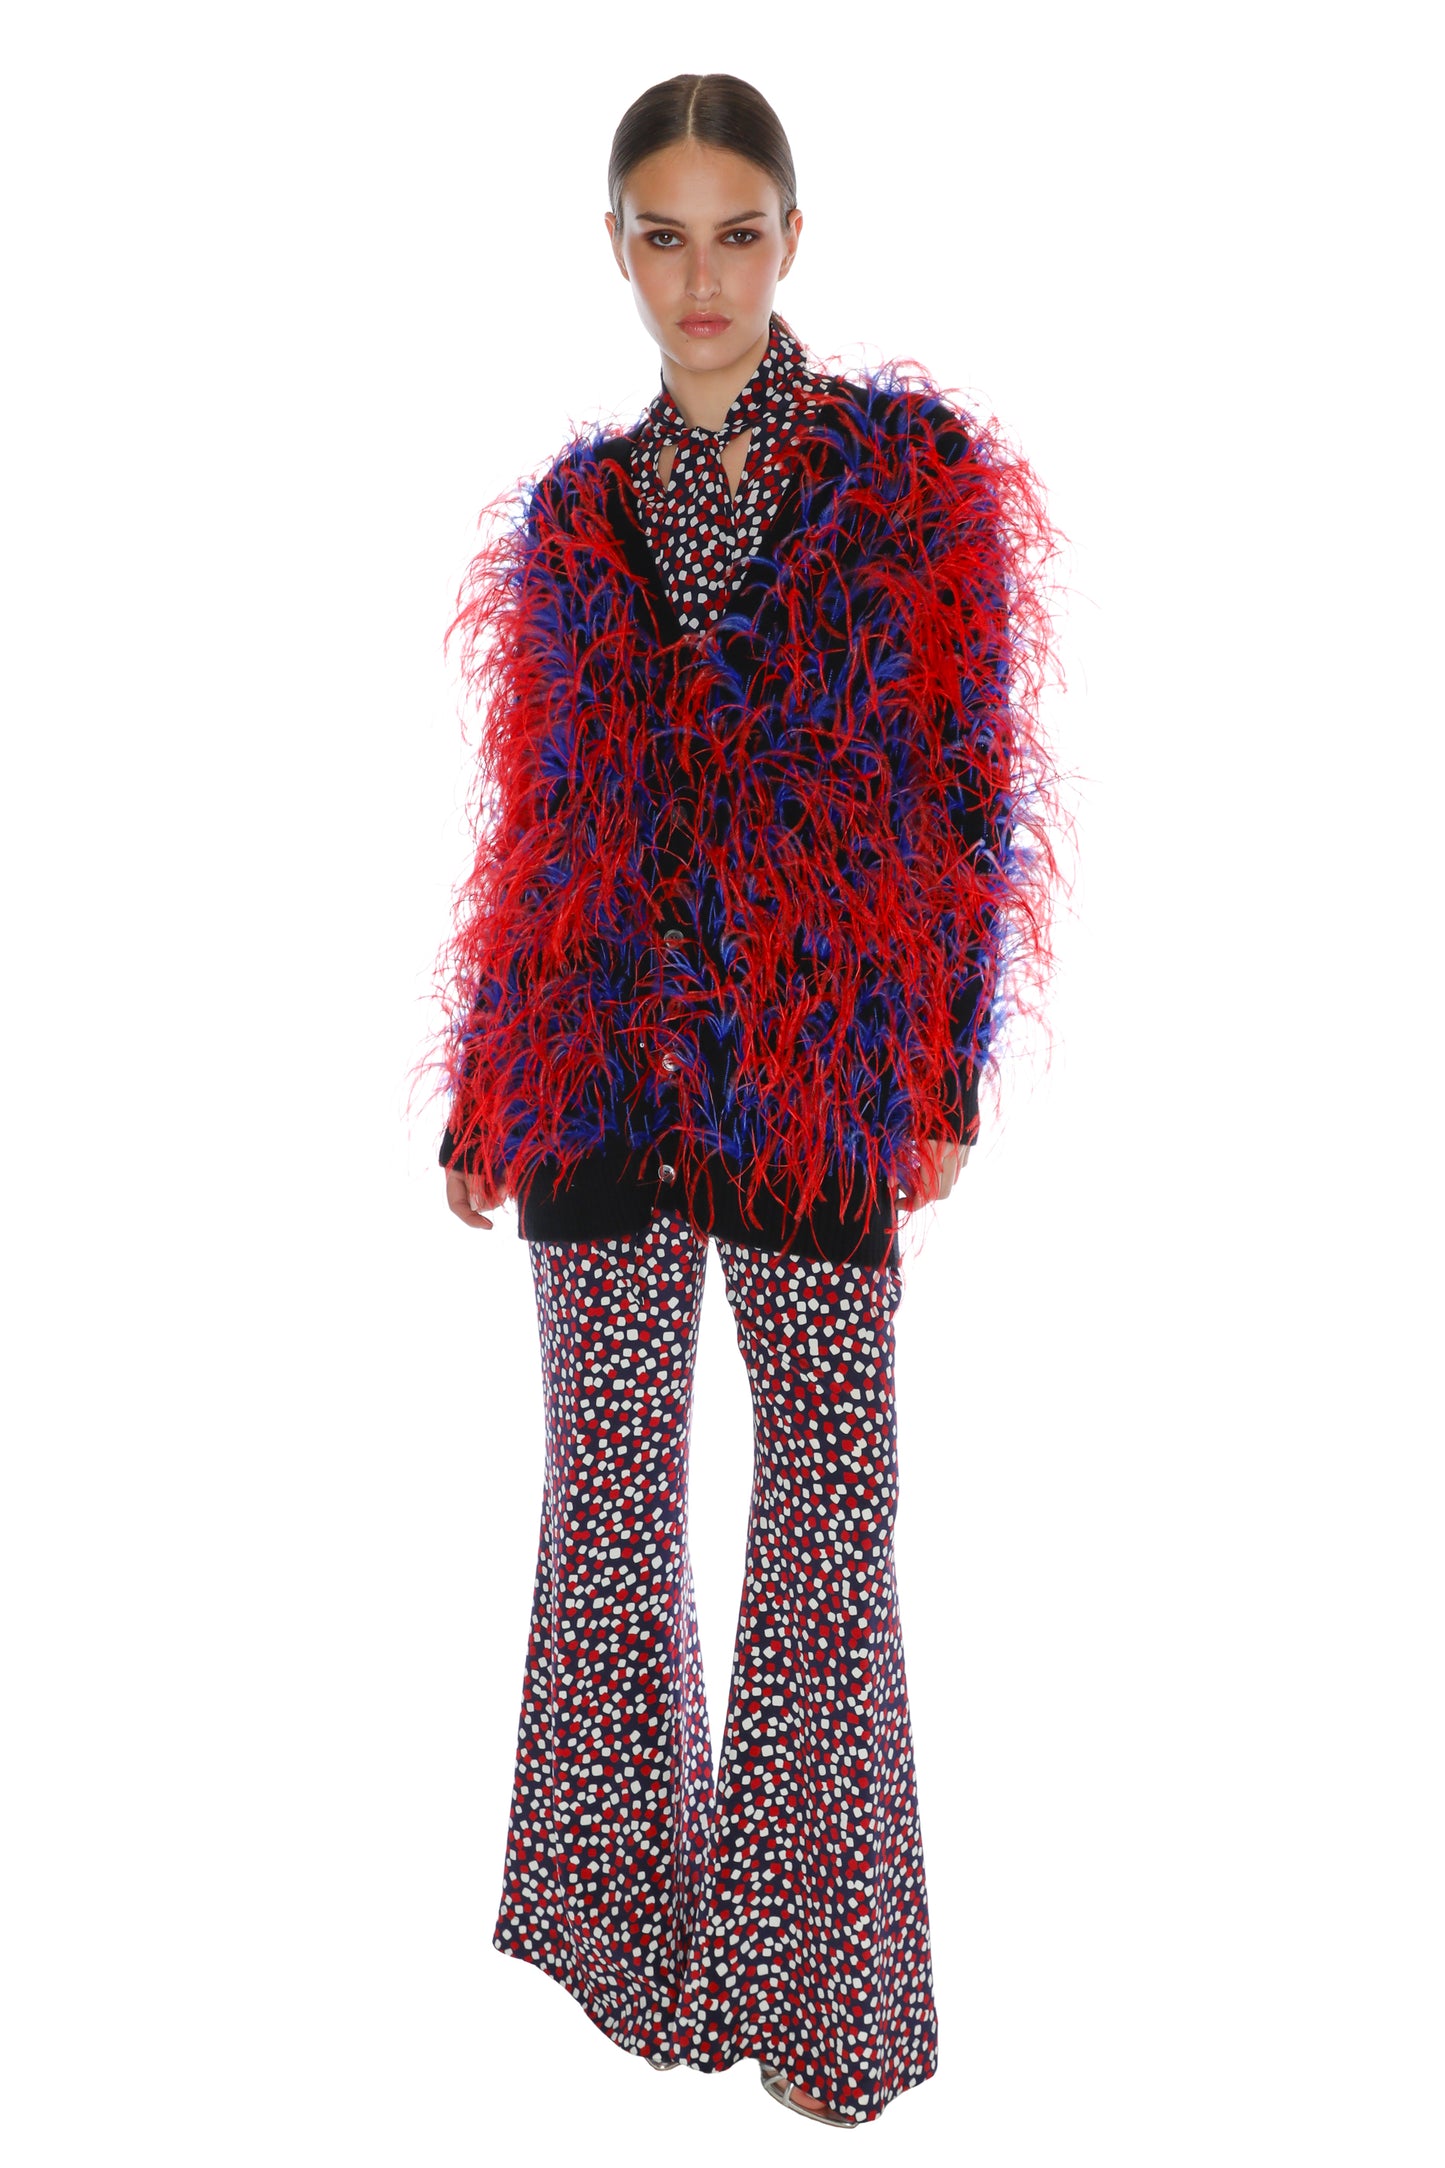 'WHAM BAM' RED FEATHERY CARDIGAN